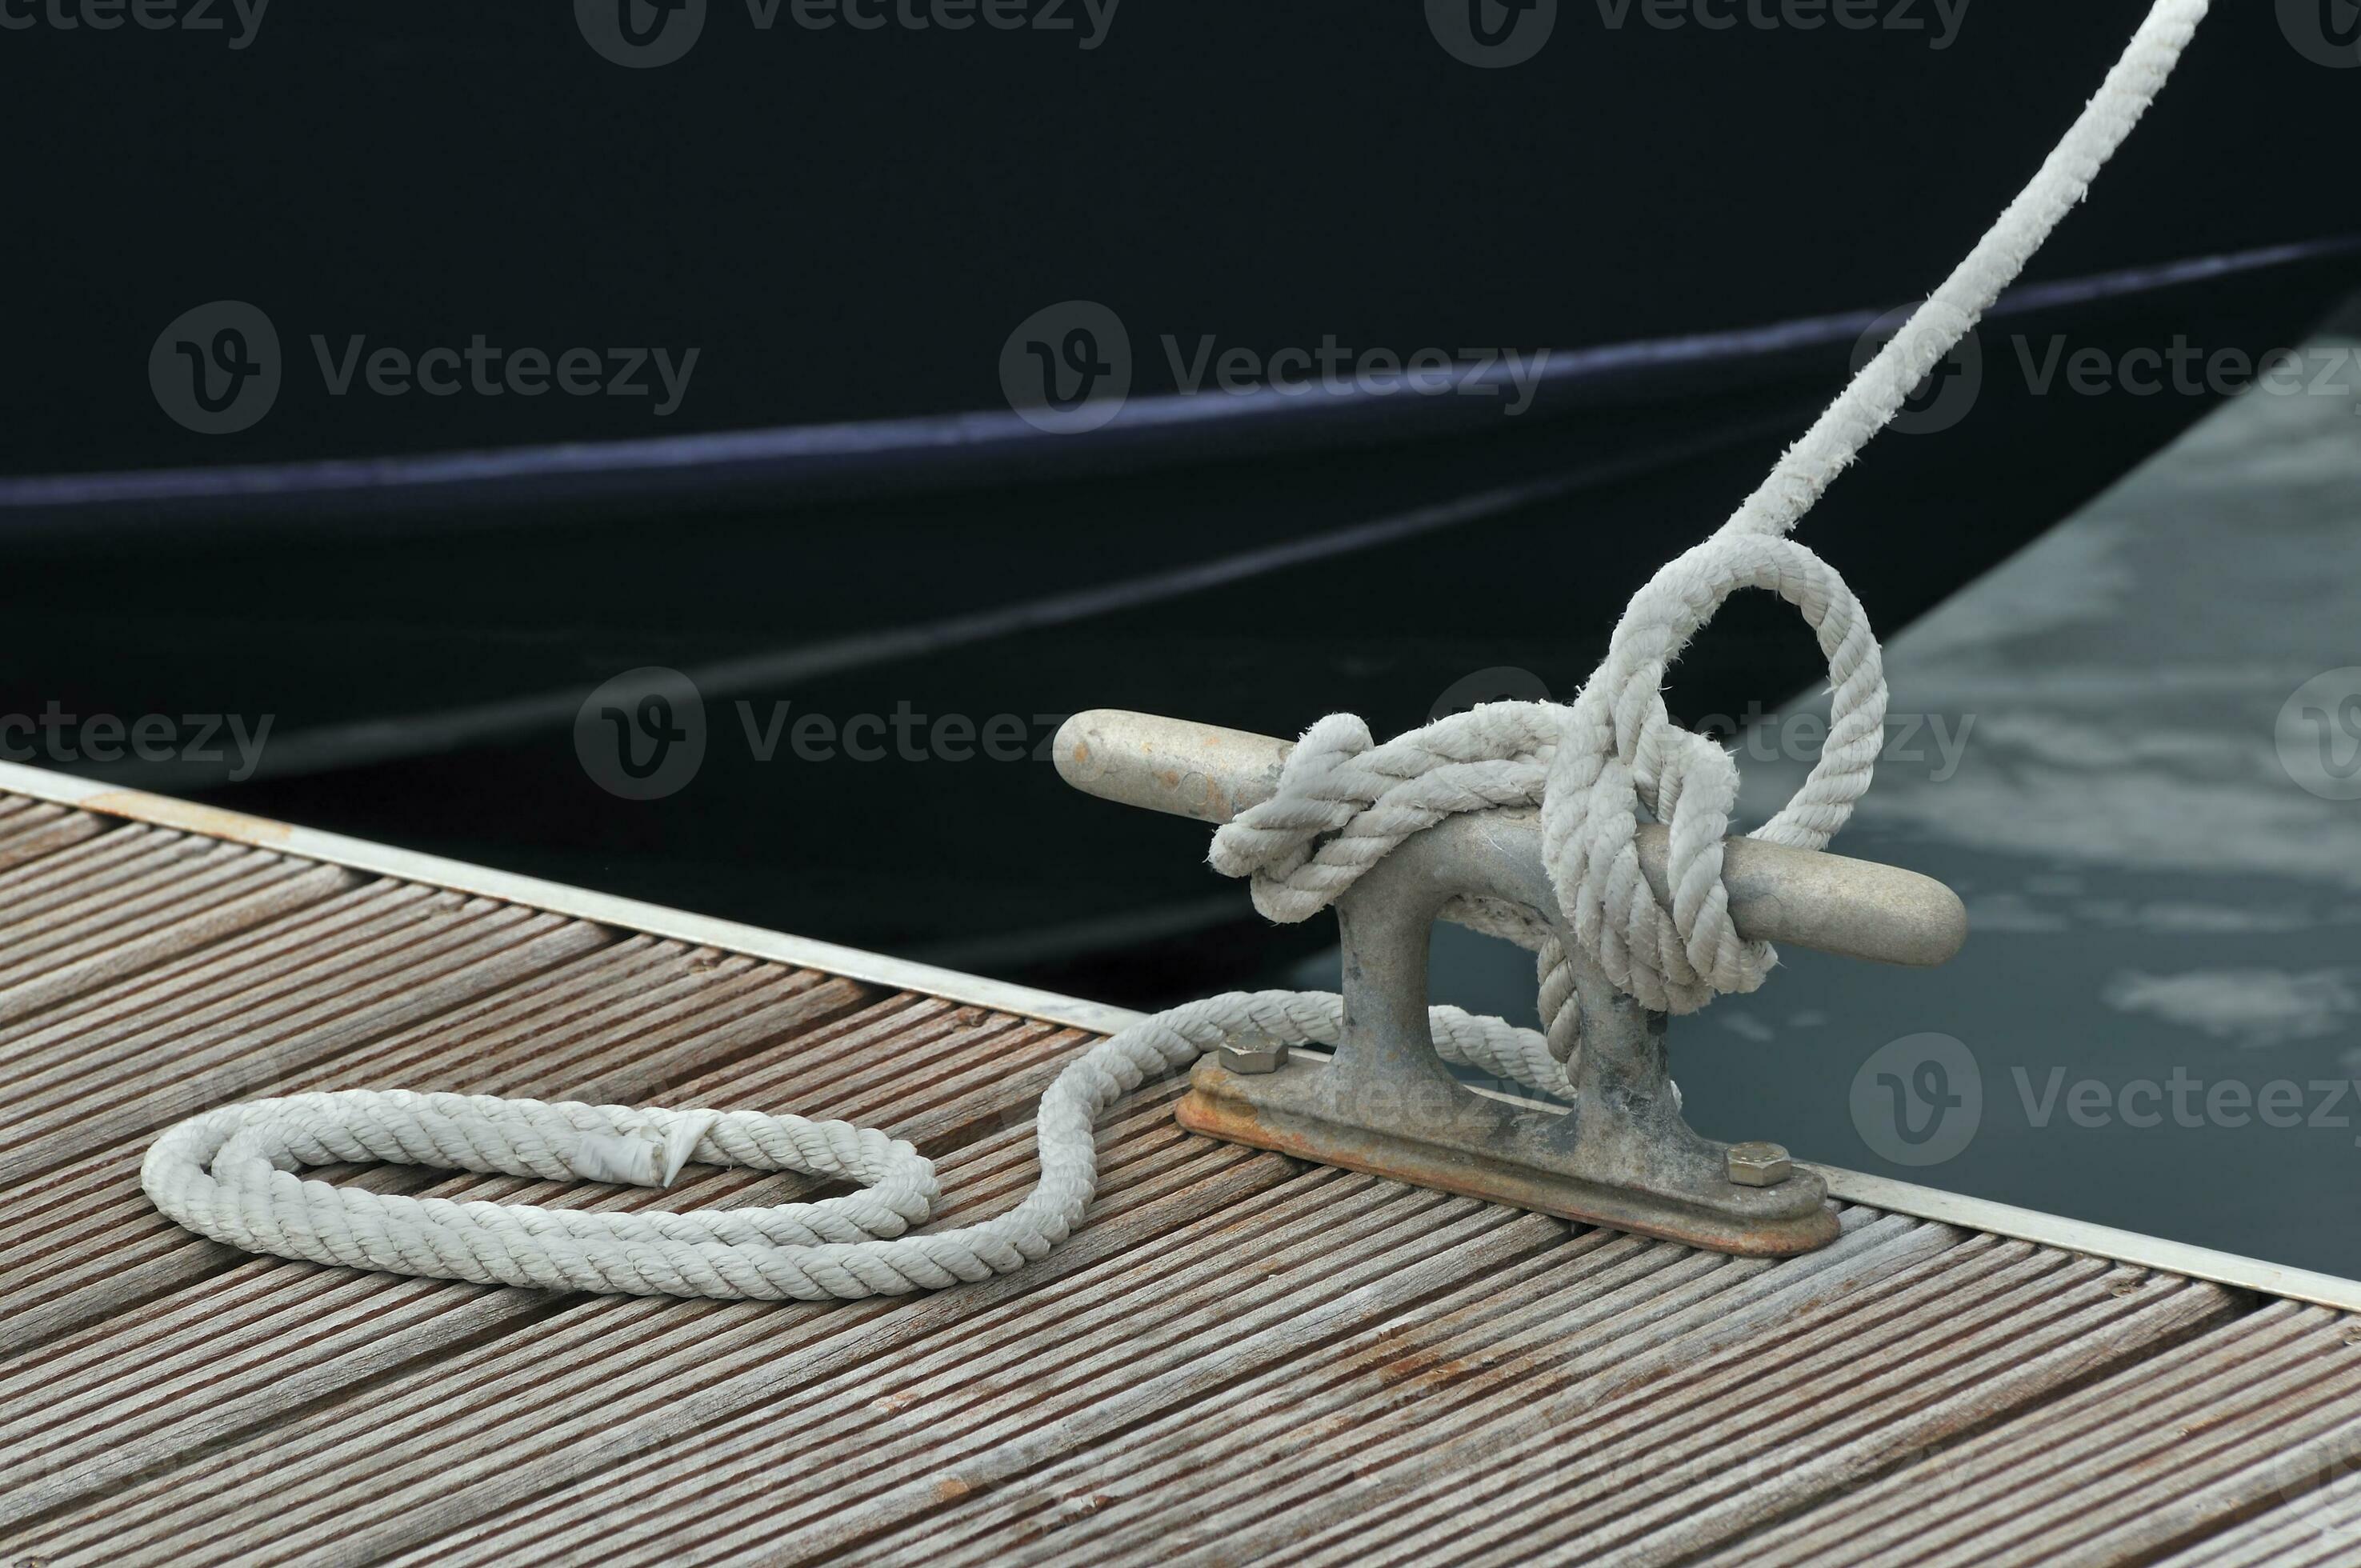 Mooring boat - Rope fasten to cleat on jetty 26293599 Stock Photo